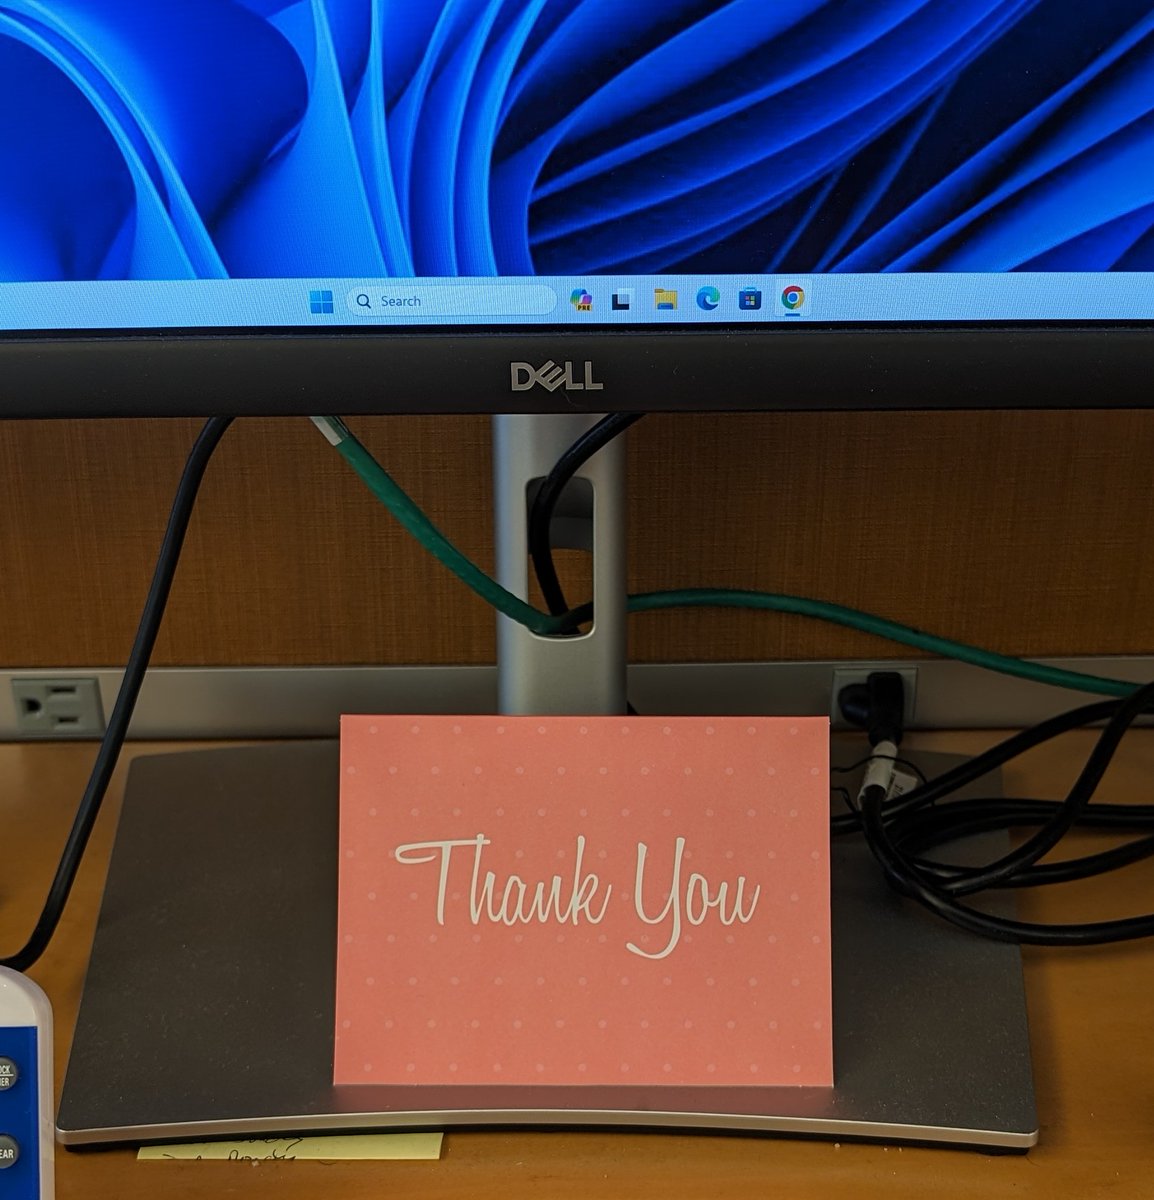 Coming back from the weekend and seeing this made my day. You're very welcome @Rajangara . I didn't do much for your @AICjanelia project but am glad it was helpful!